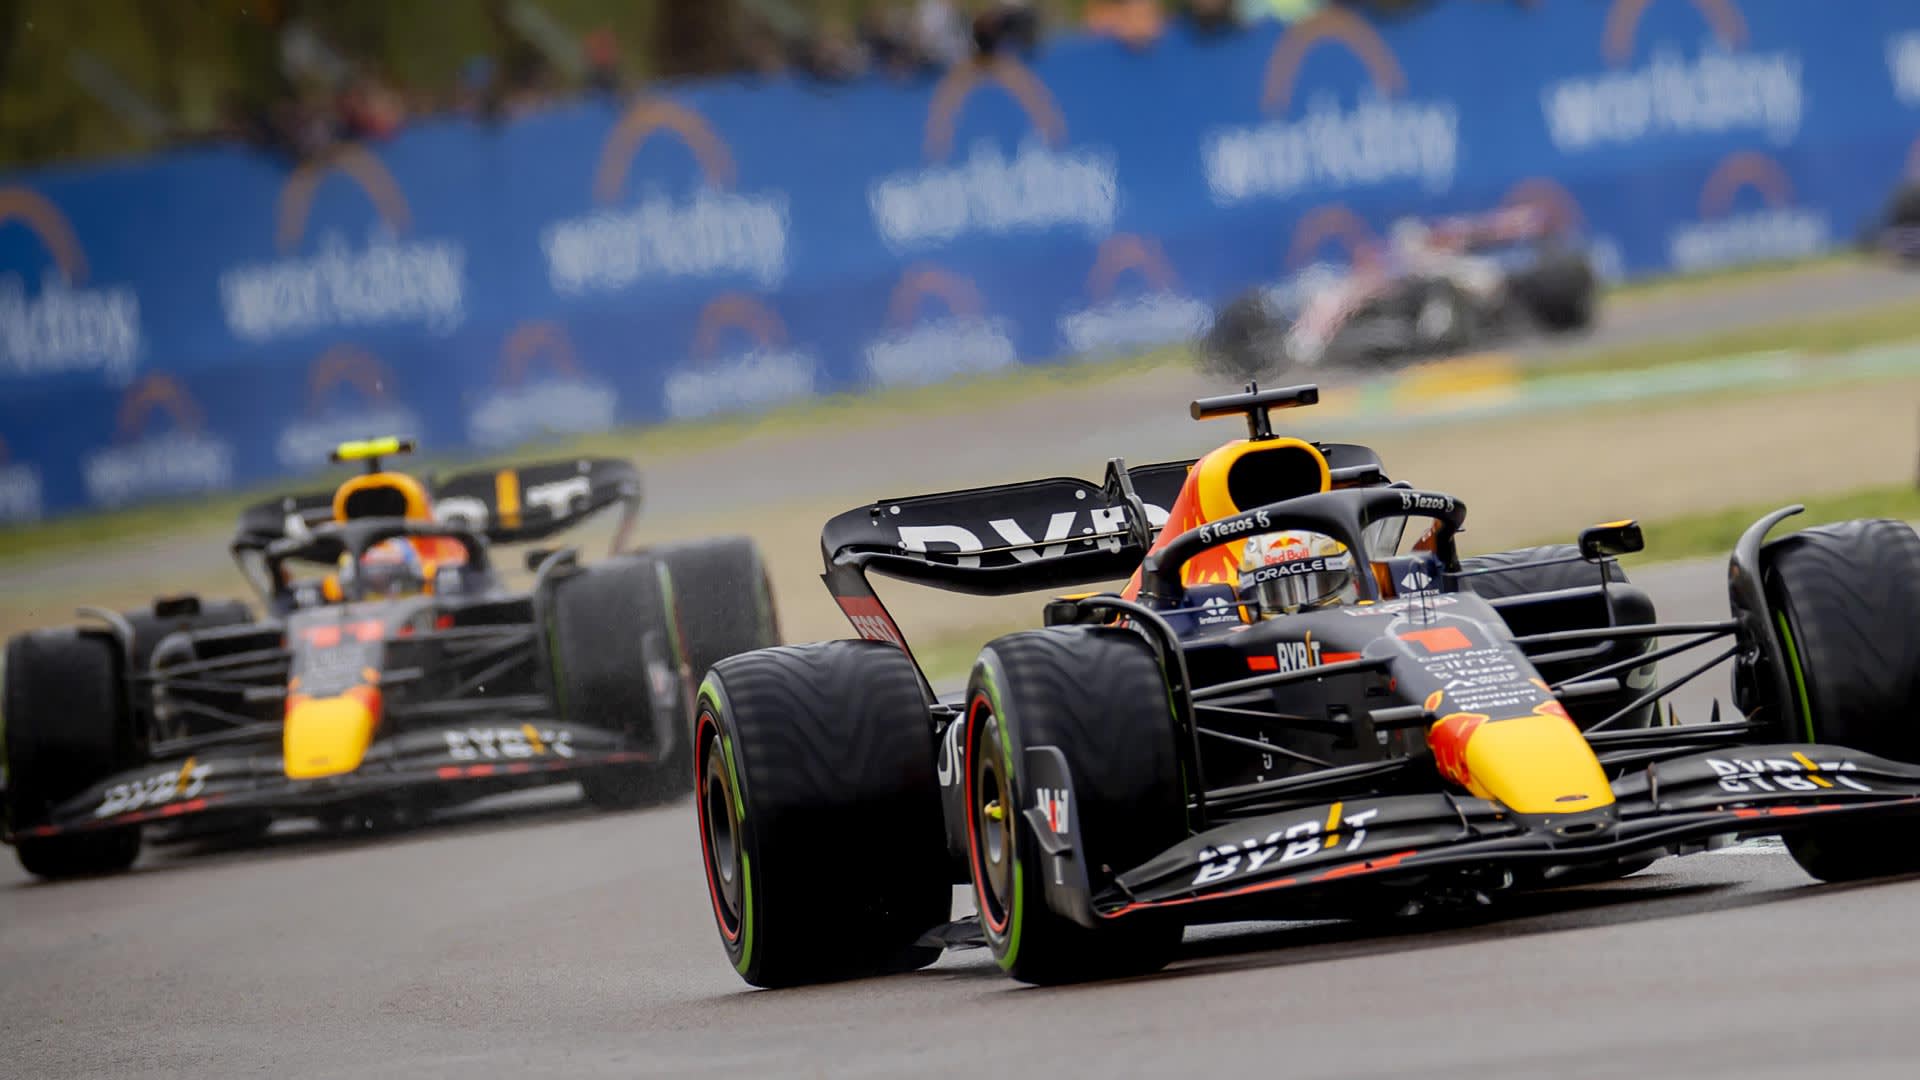 2022 Emilia Romagna Grand Prix report and highlights Verstappen leads Red Bull 1-2 as Ferrari falter in action-packed Imola race Formula 1®